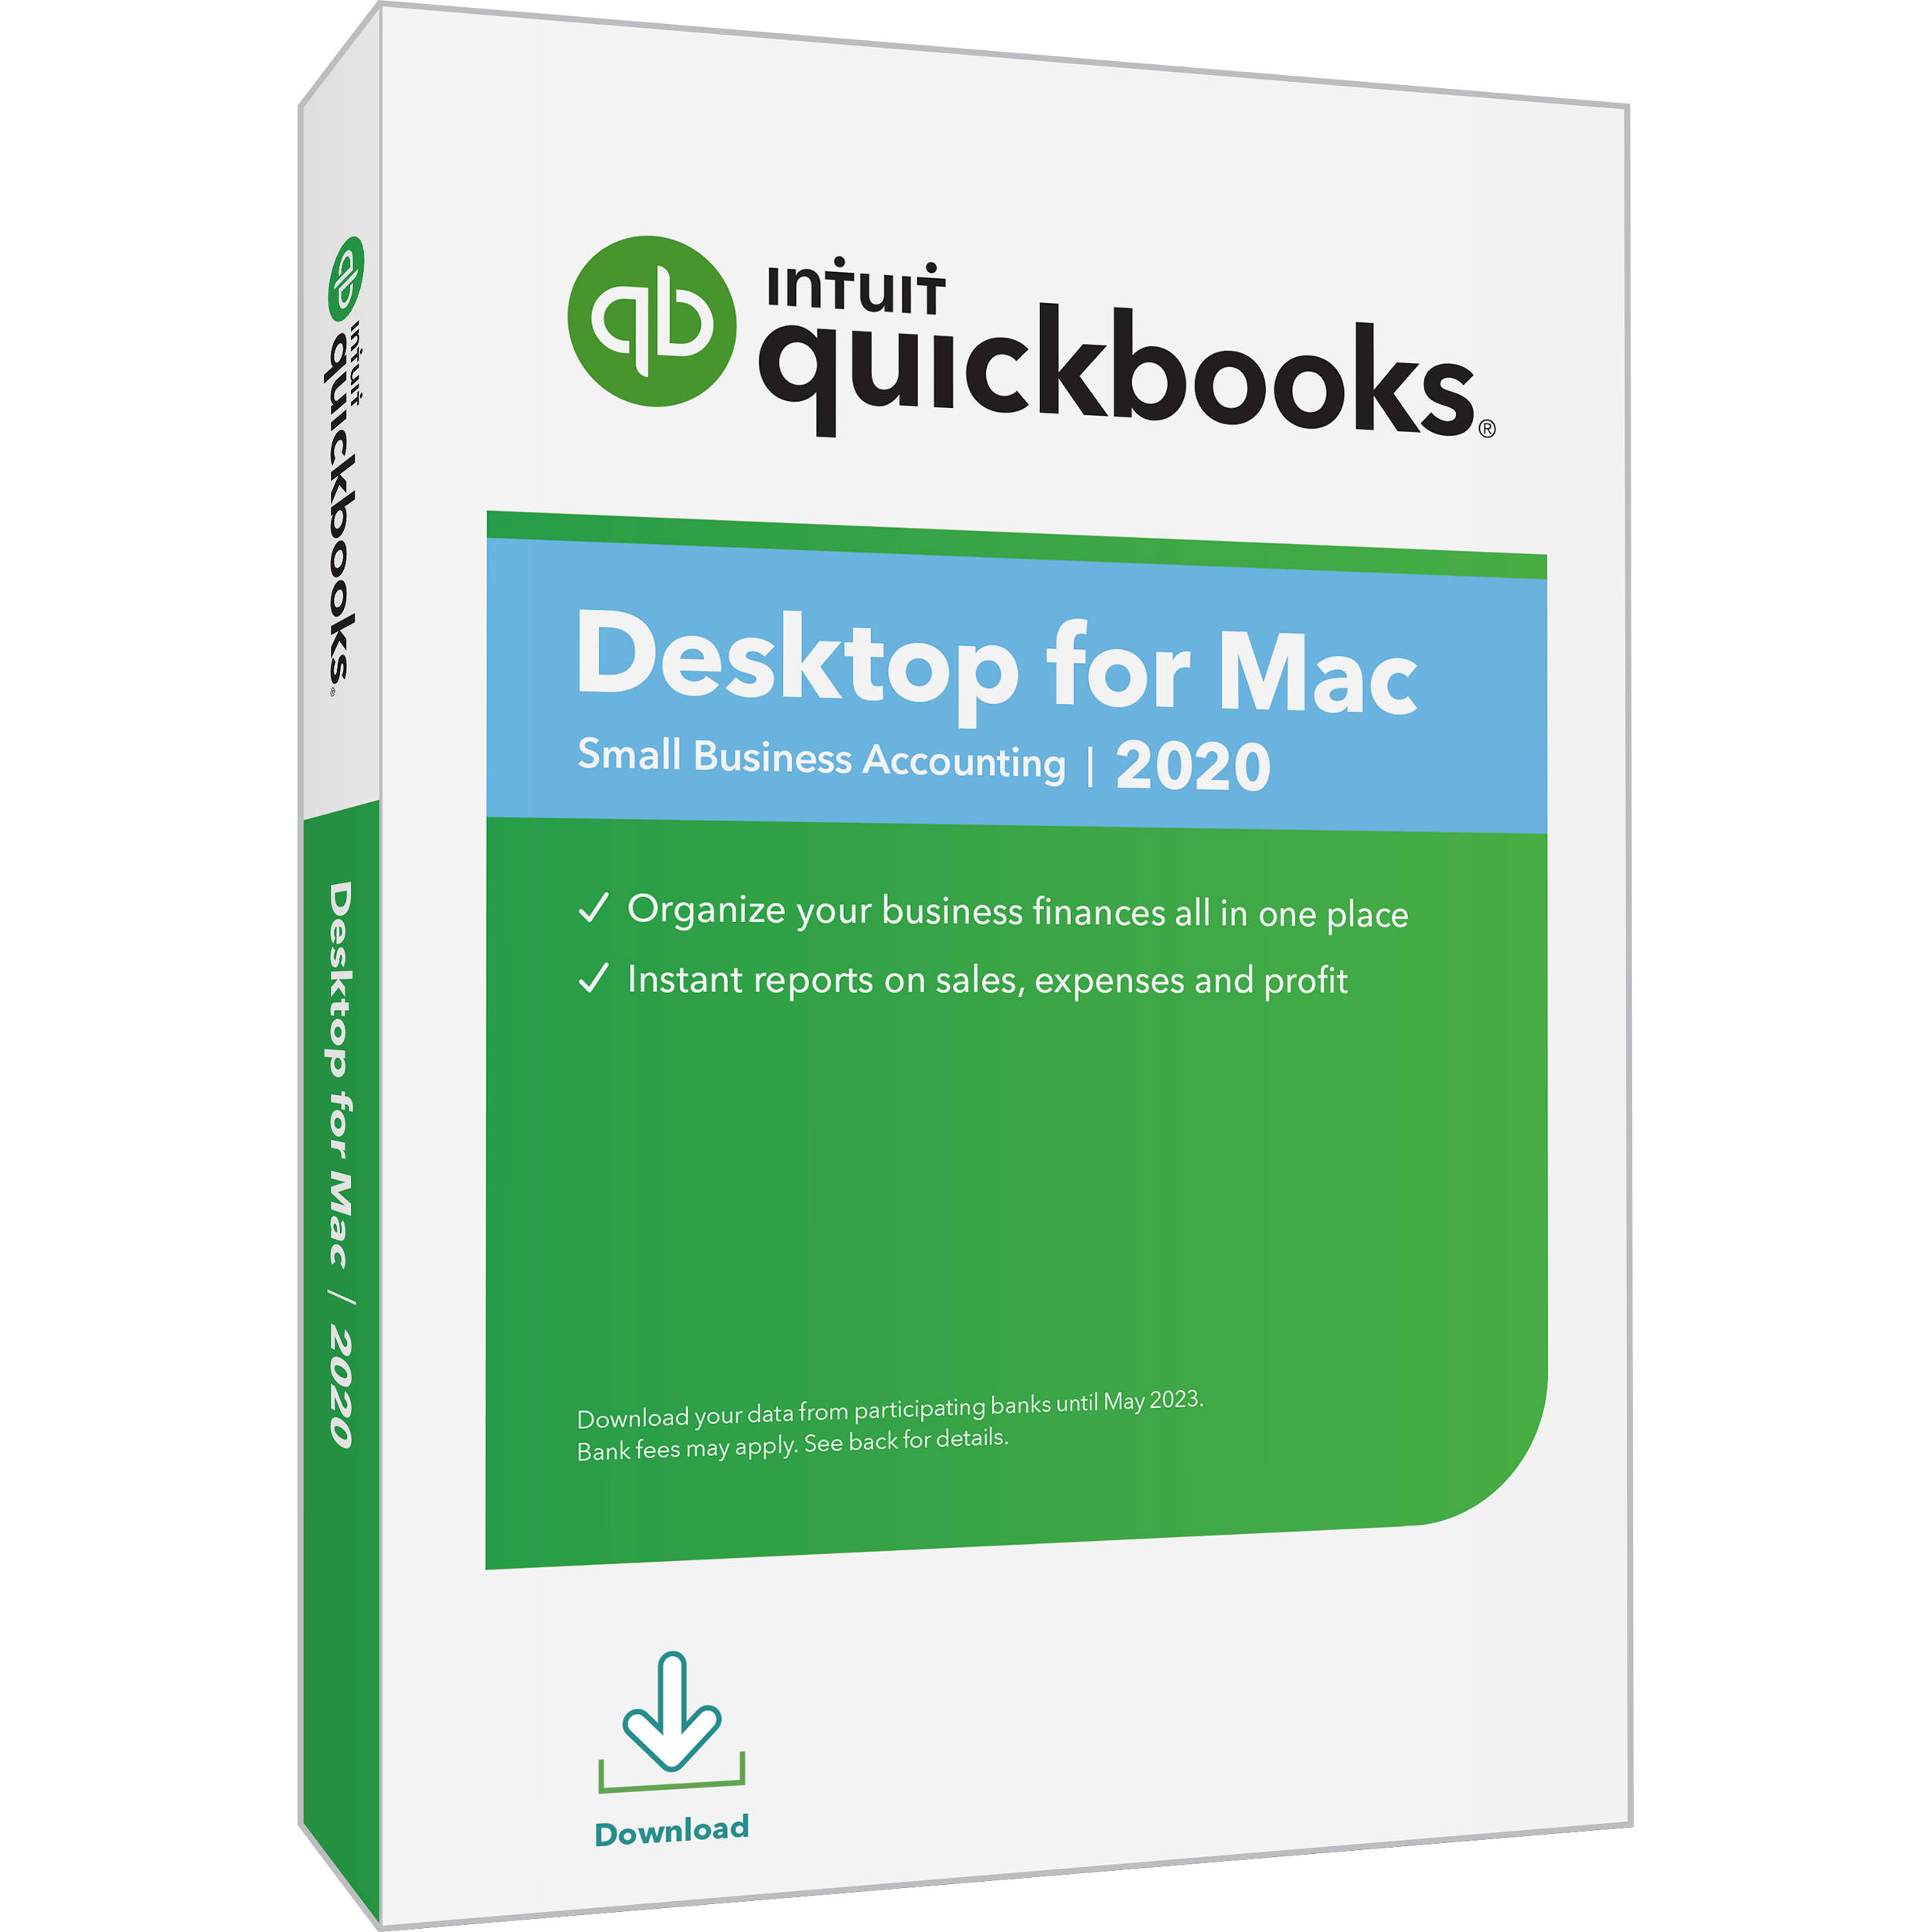 send forms on quickbooks for mac 2016?